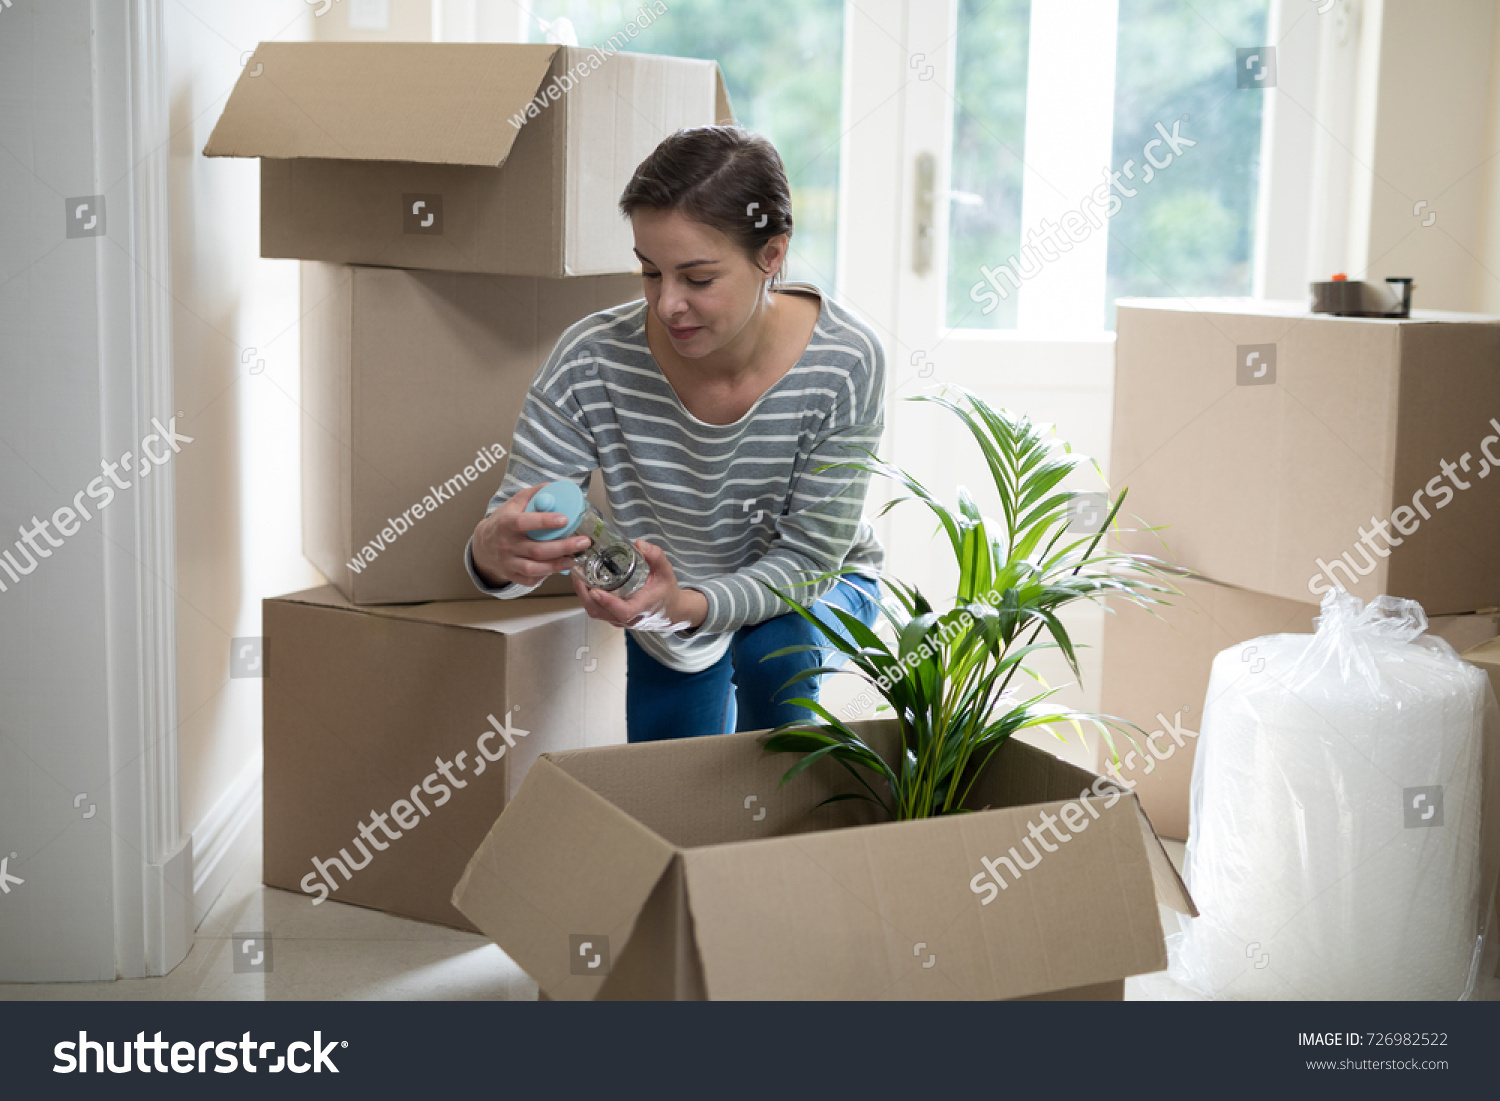 Woman opening cardboard boxes in living room at home #726982522